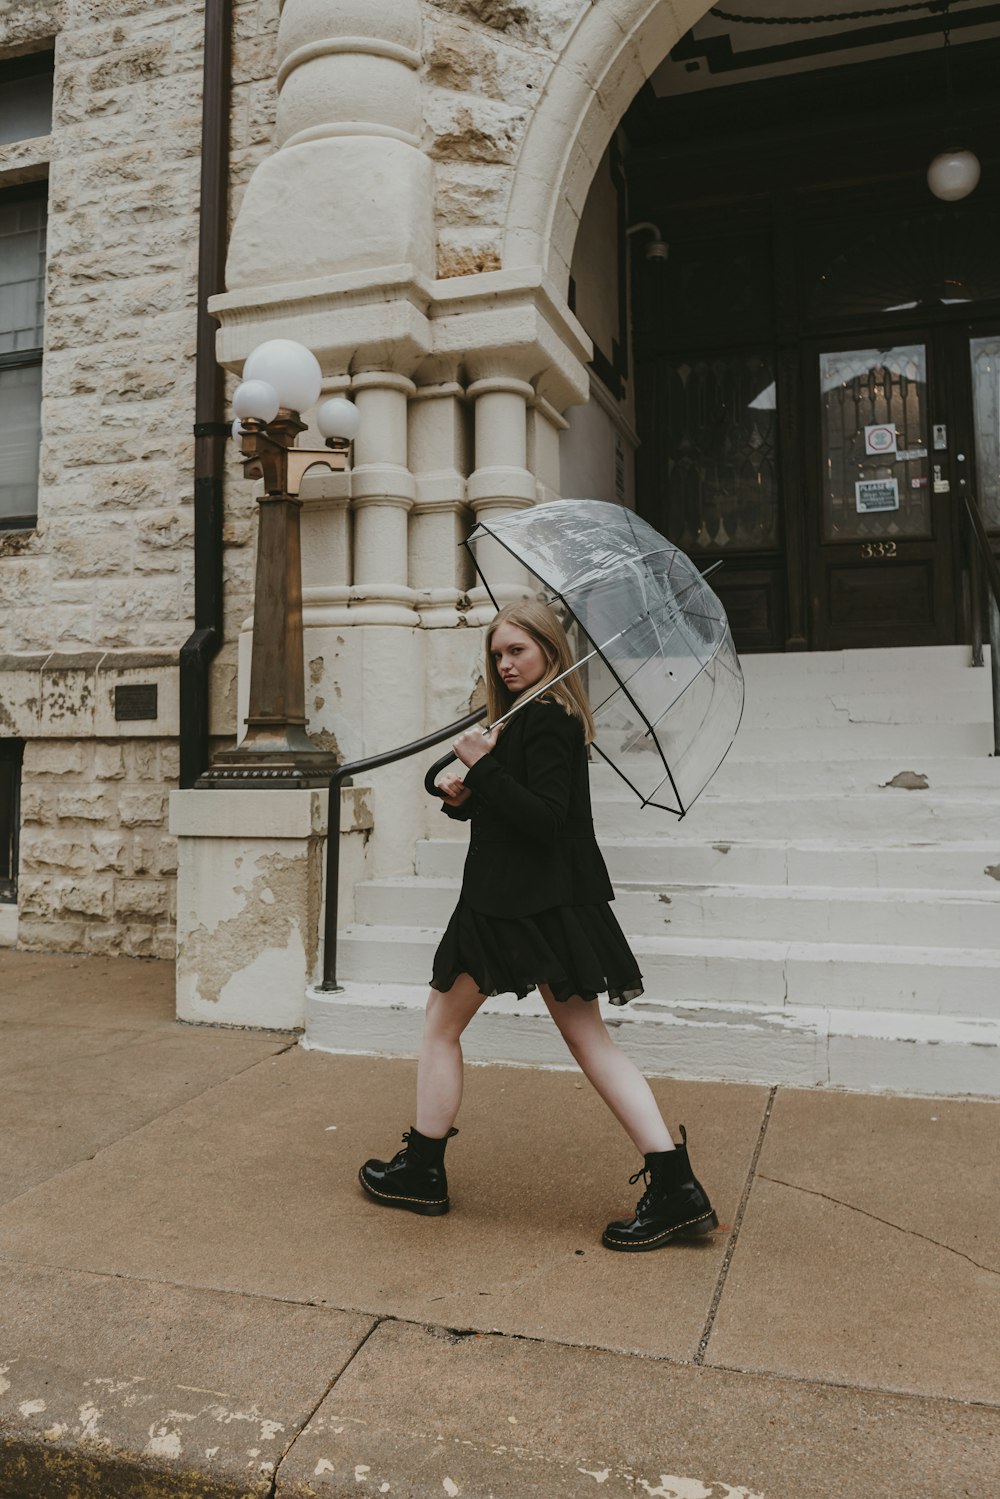 a young girl holding an umbrella while walking down a sidewalk